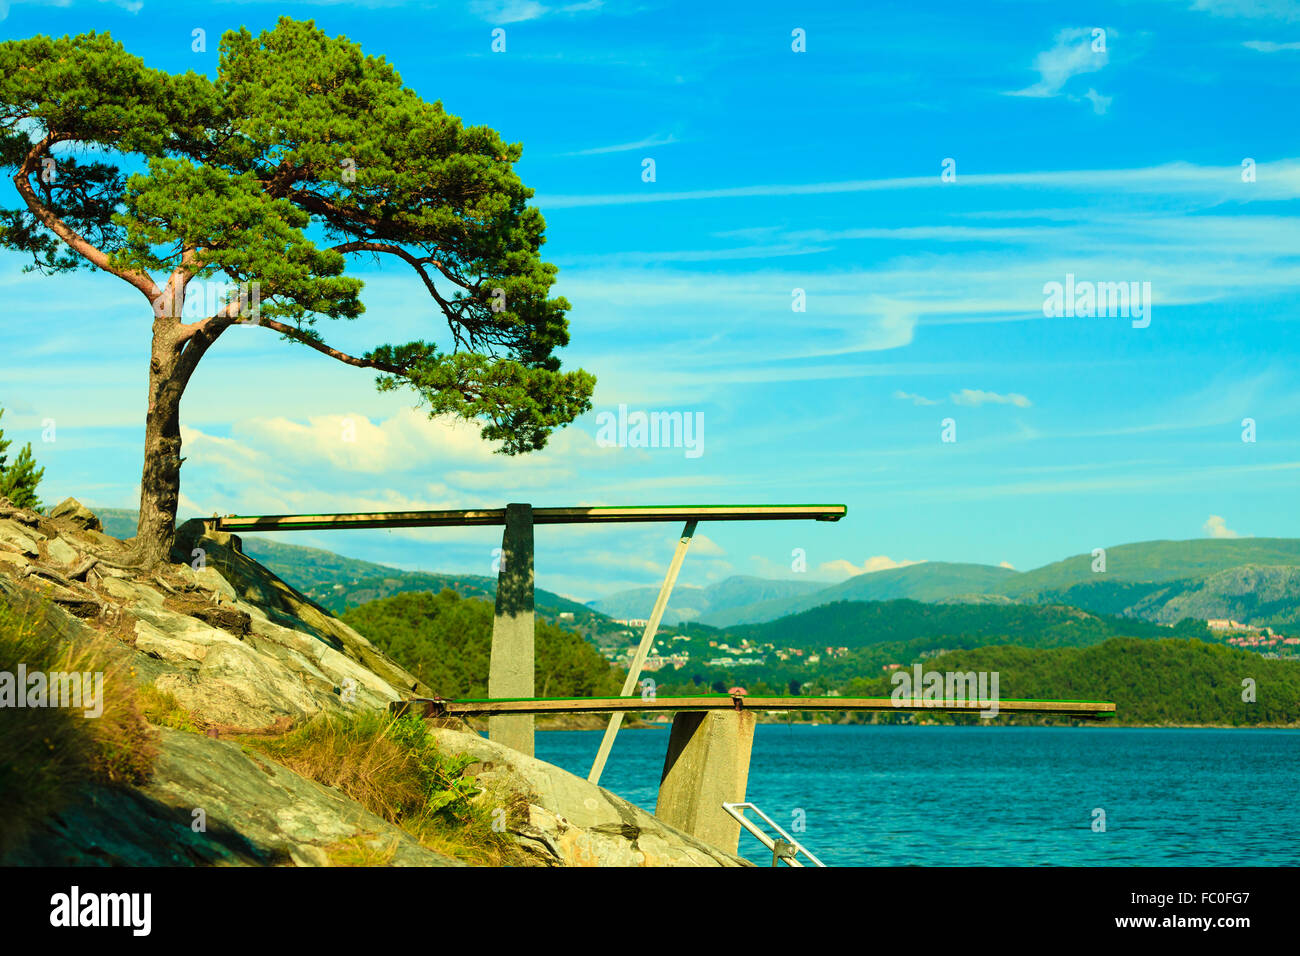 View of diving board. Springboard to dive at water. Stock Photo